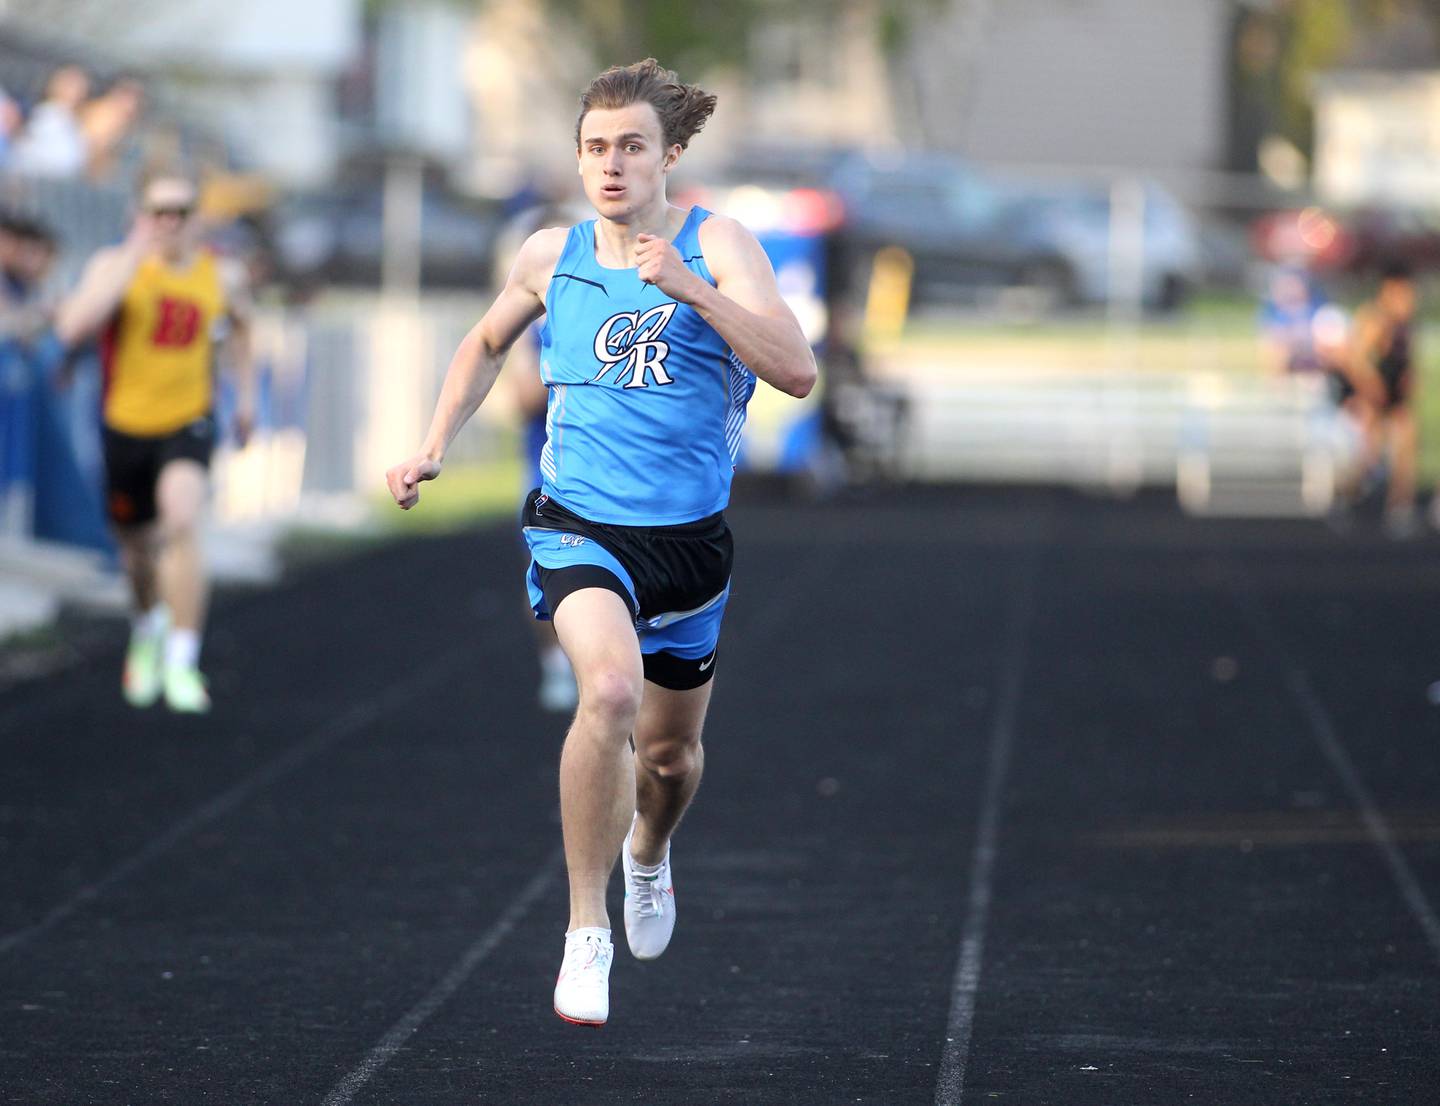 Burlington Central’s Zac Schmidt competes in the 400-meter run during the Kane County Boys Track and Field Invitational at Geneva High School on Monday, May 9, 2022.